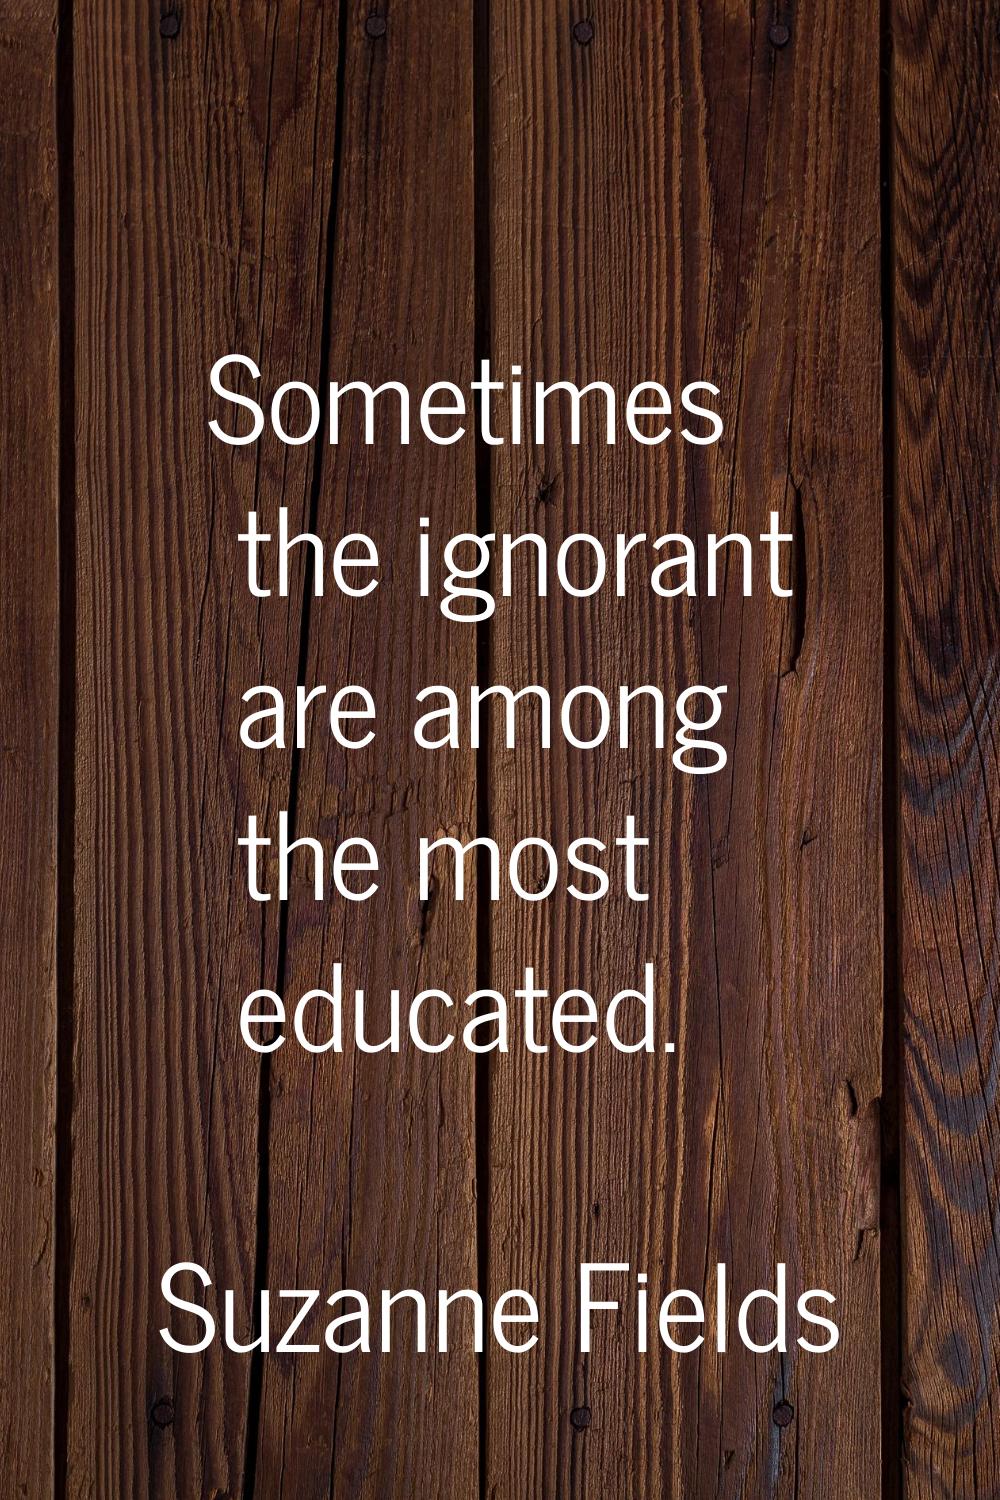 Sometimes the ignorant are among the most educated.